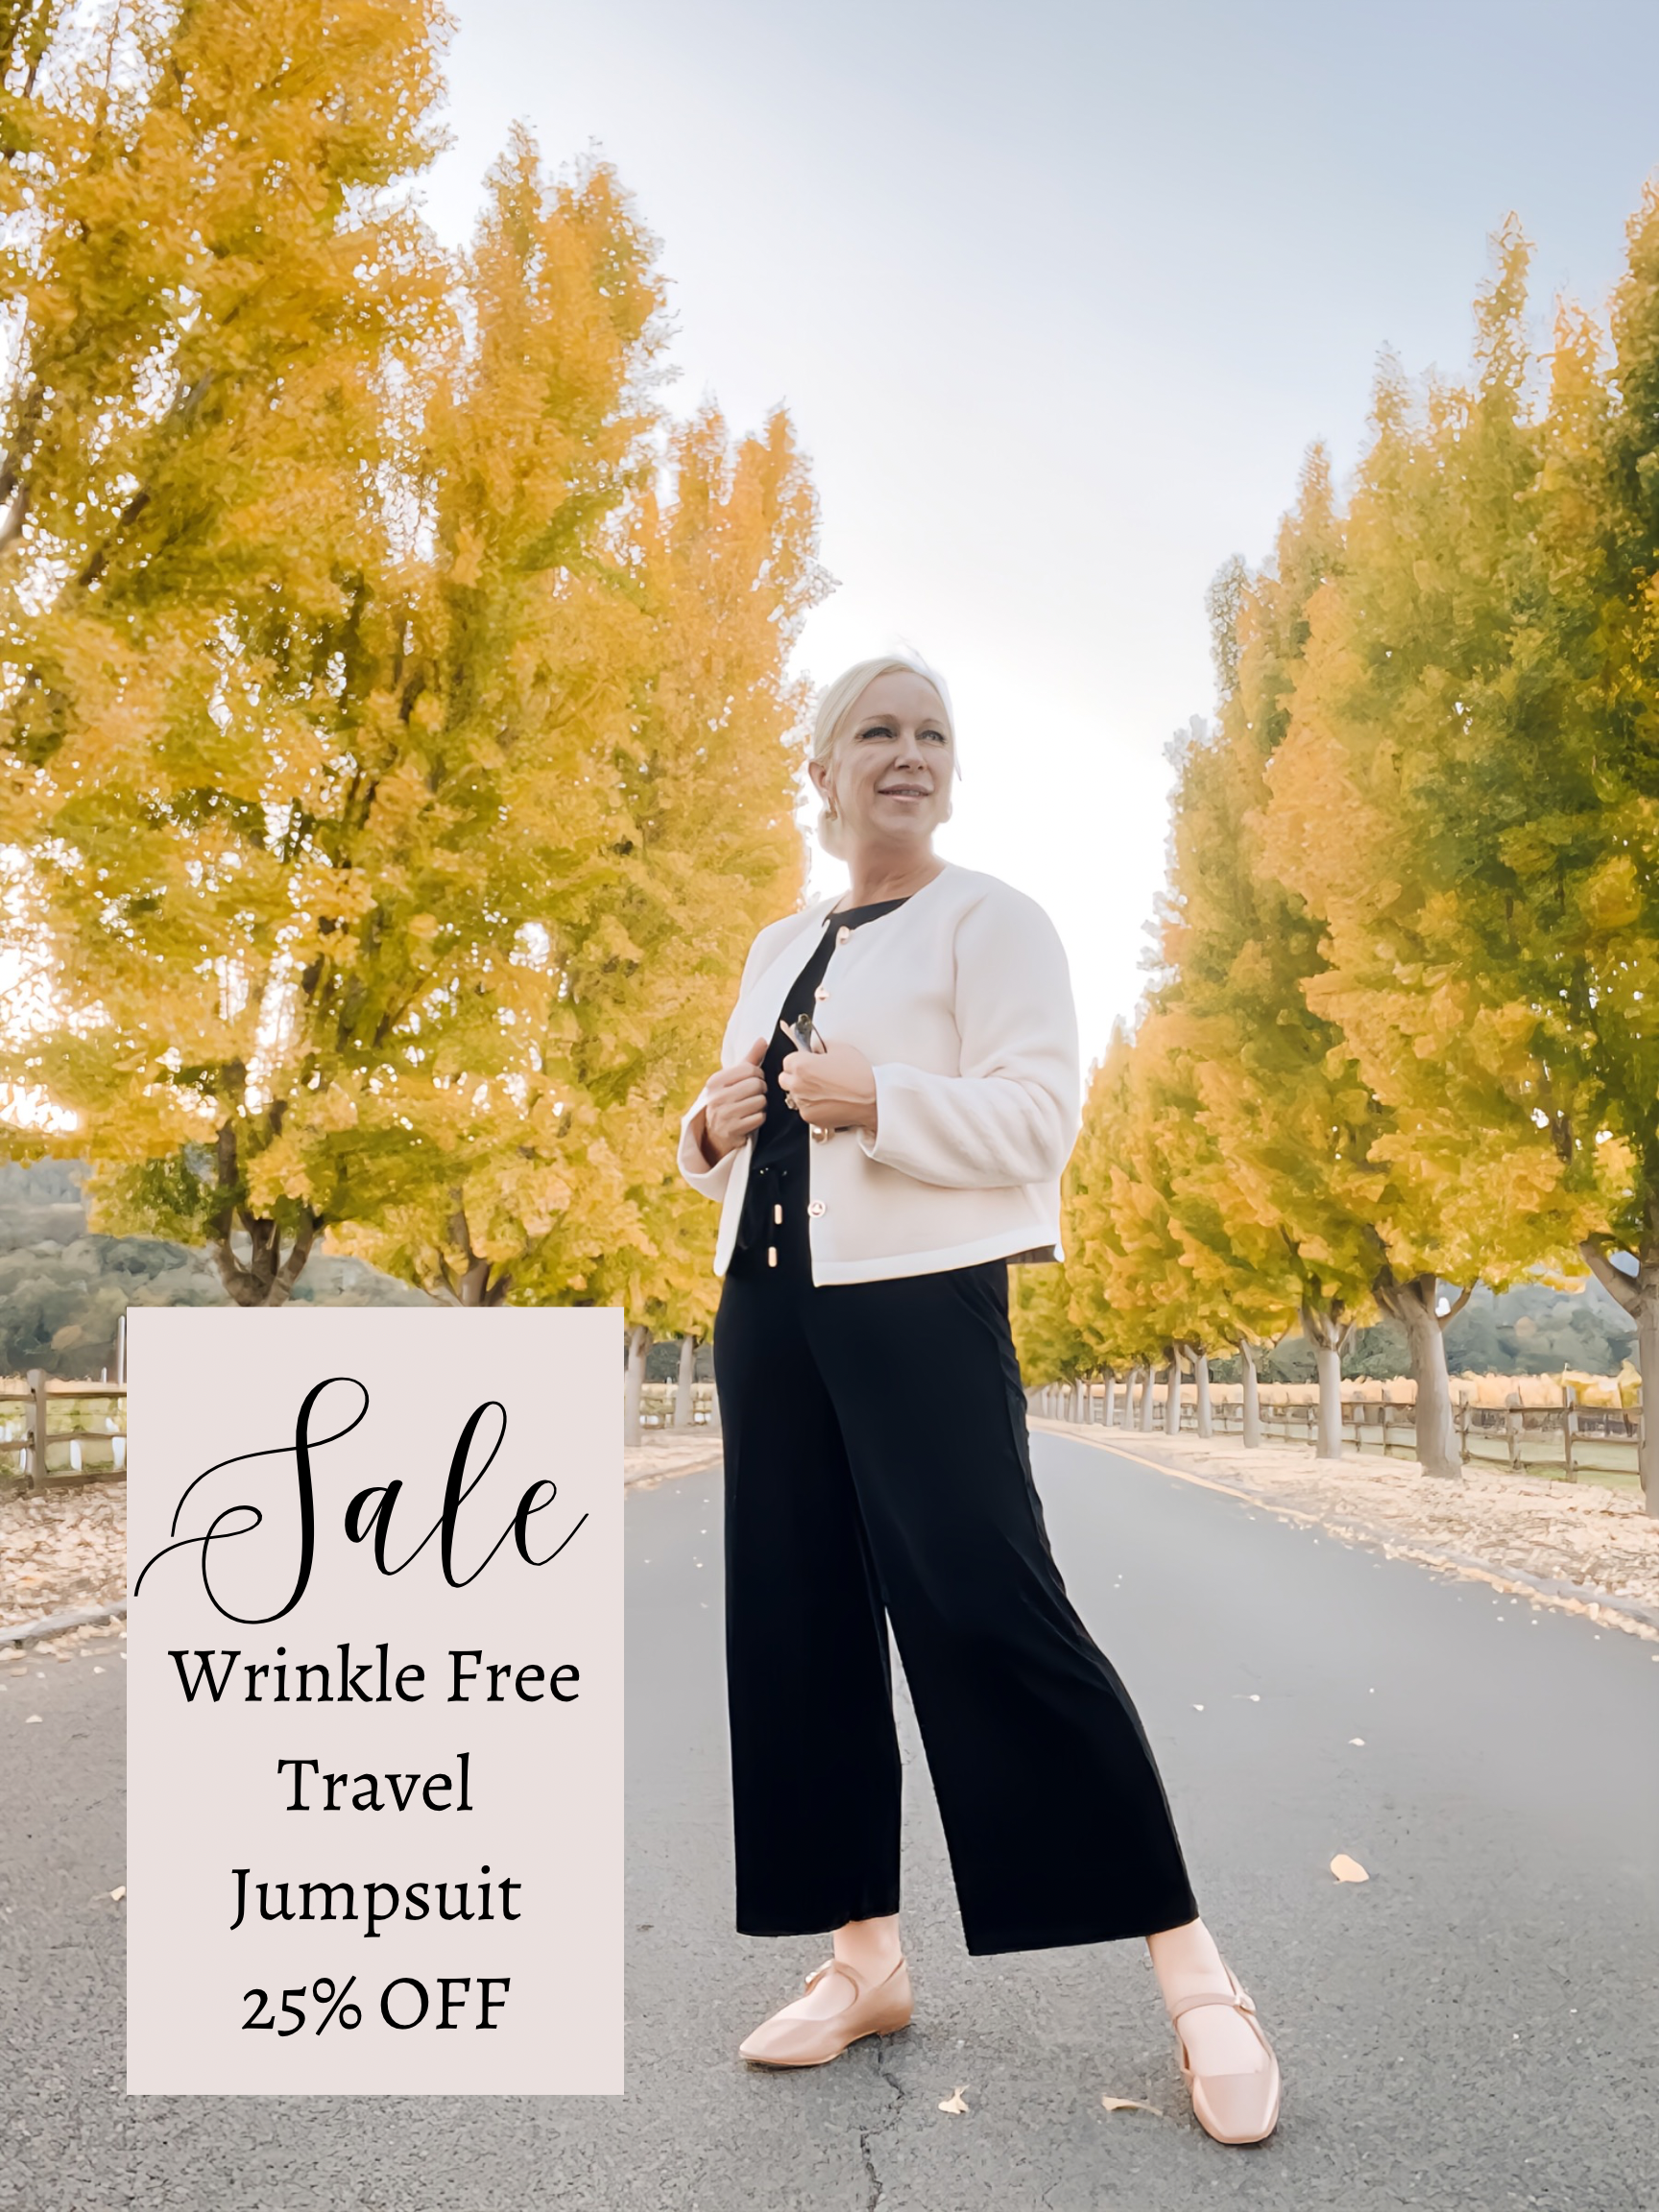 Wrinkle Free Travel Clothing is NOW 25% OFF!